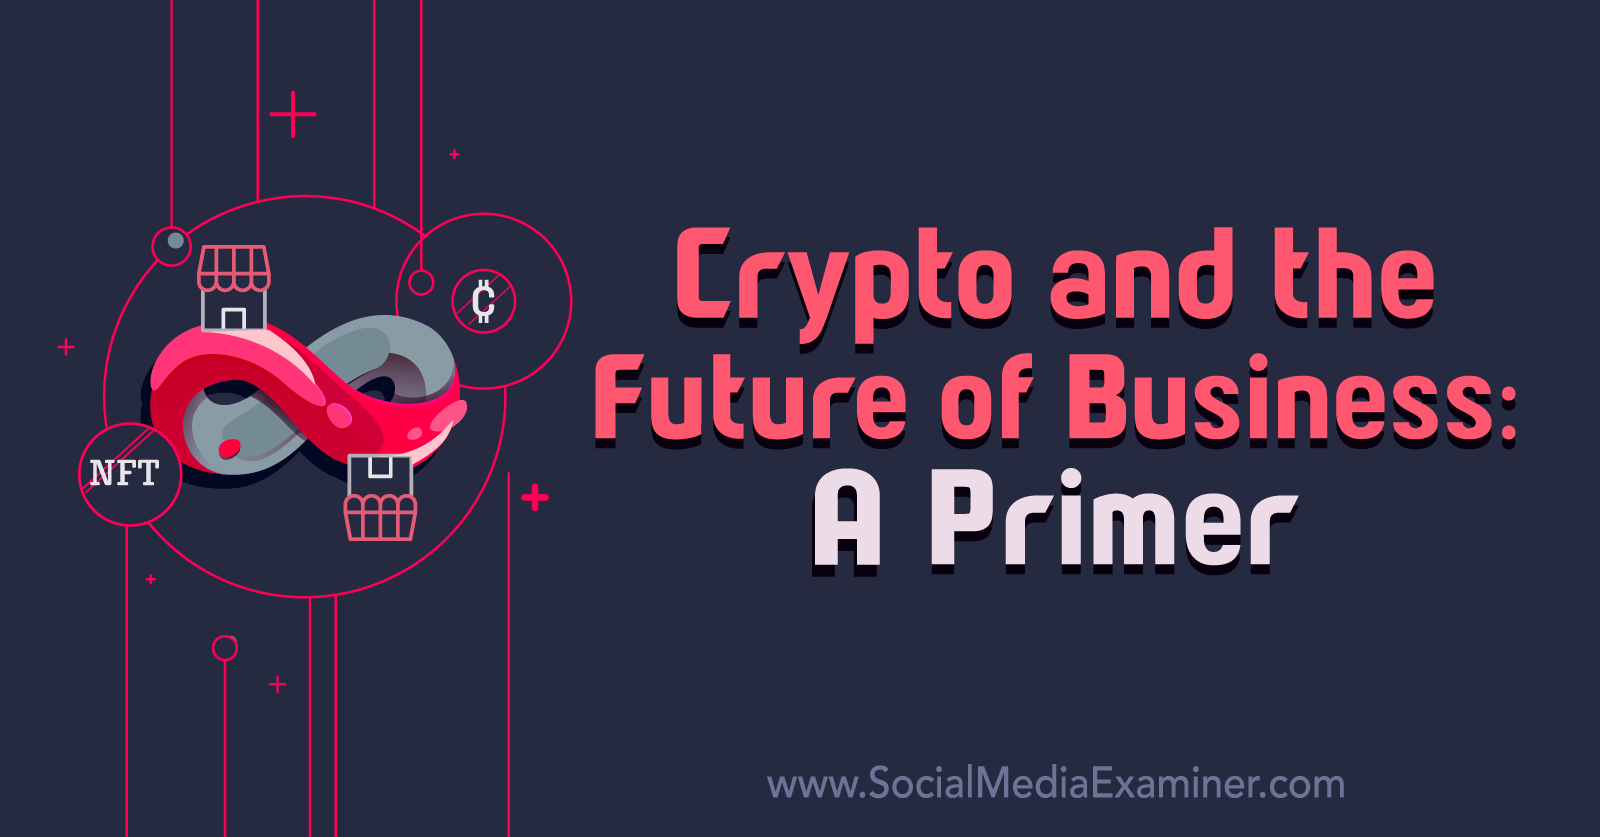 Crypto and the Future of Business: A Primer with insights from Denise Holt and Michael Stelzner